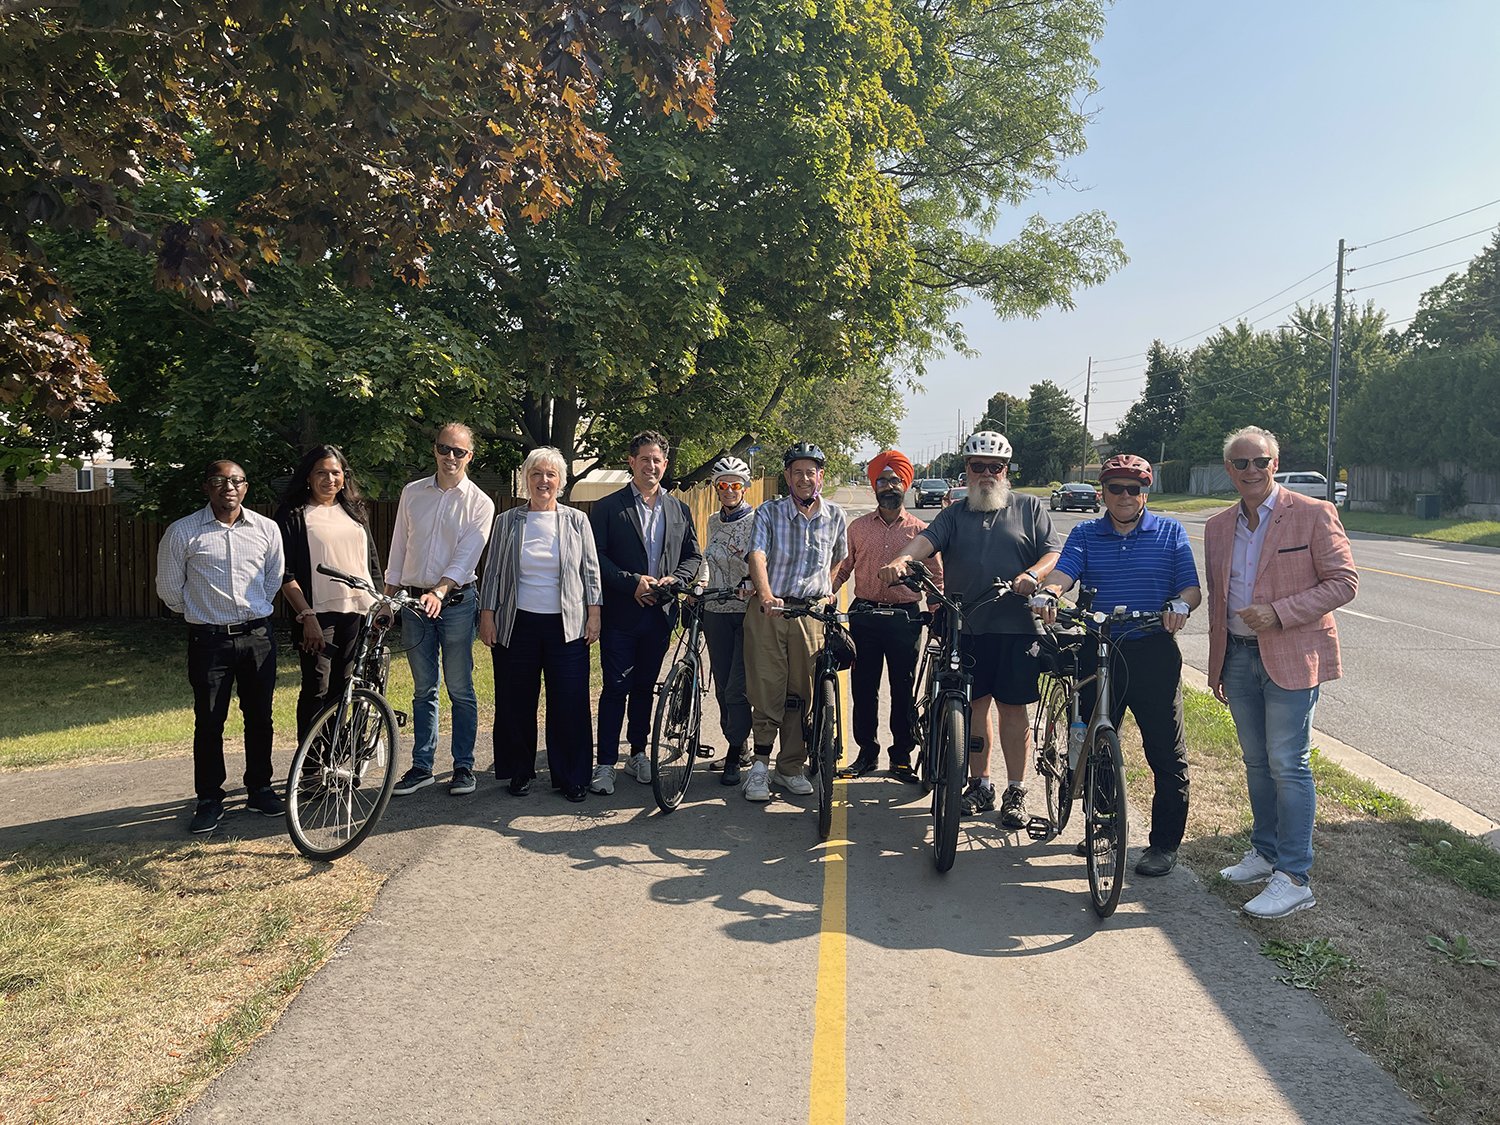 Members of council were joined by members of the Oshawa Active Transportation Advisory Committee (OATAC) along the path just north of Thornton and Rossland Road to mark the opening of the new multi-use path system.